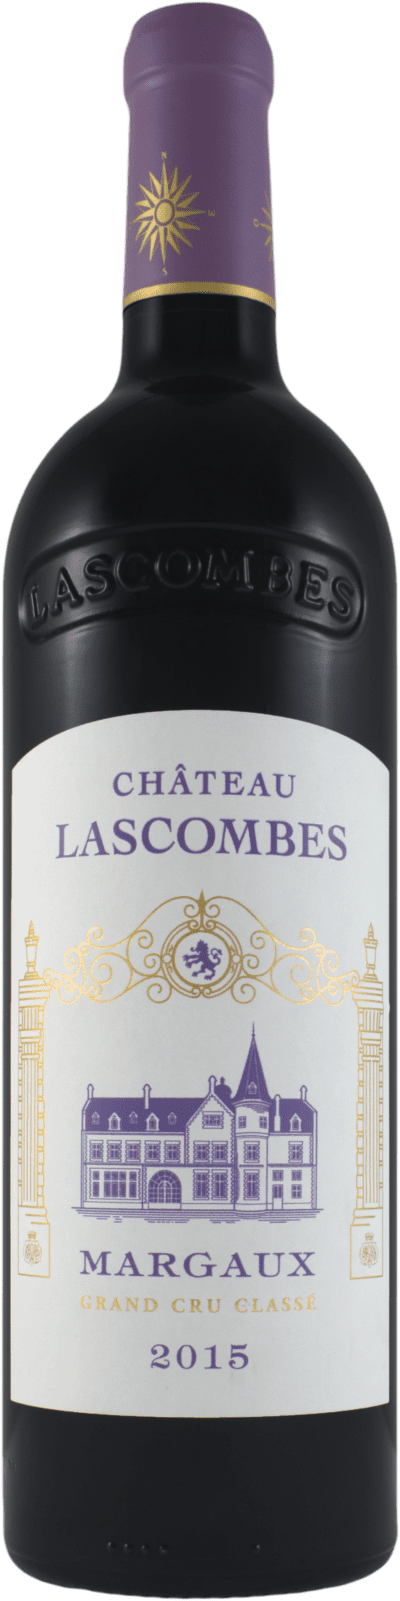 Chateau Lascombes 2015 1